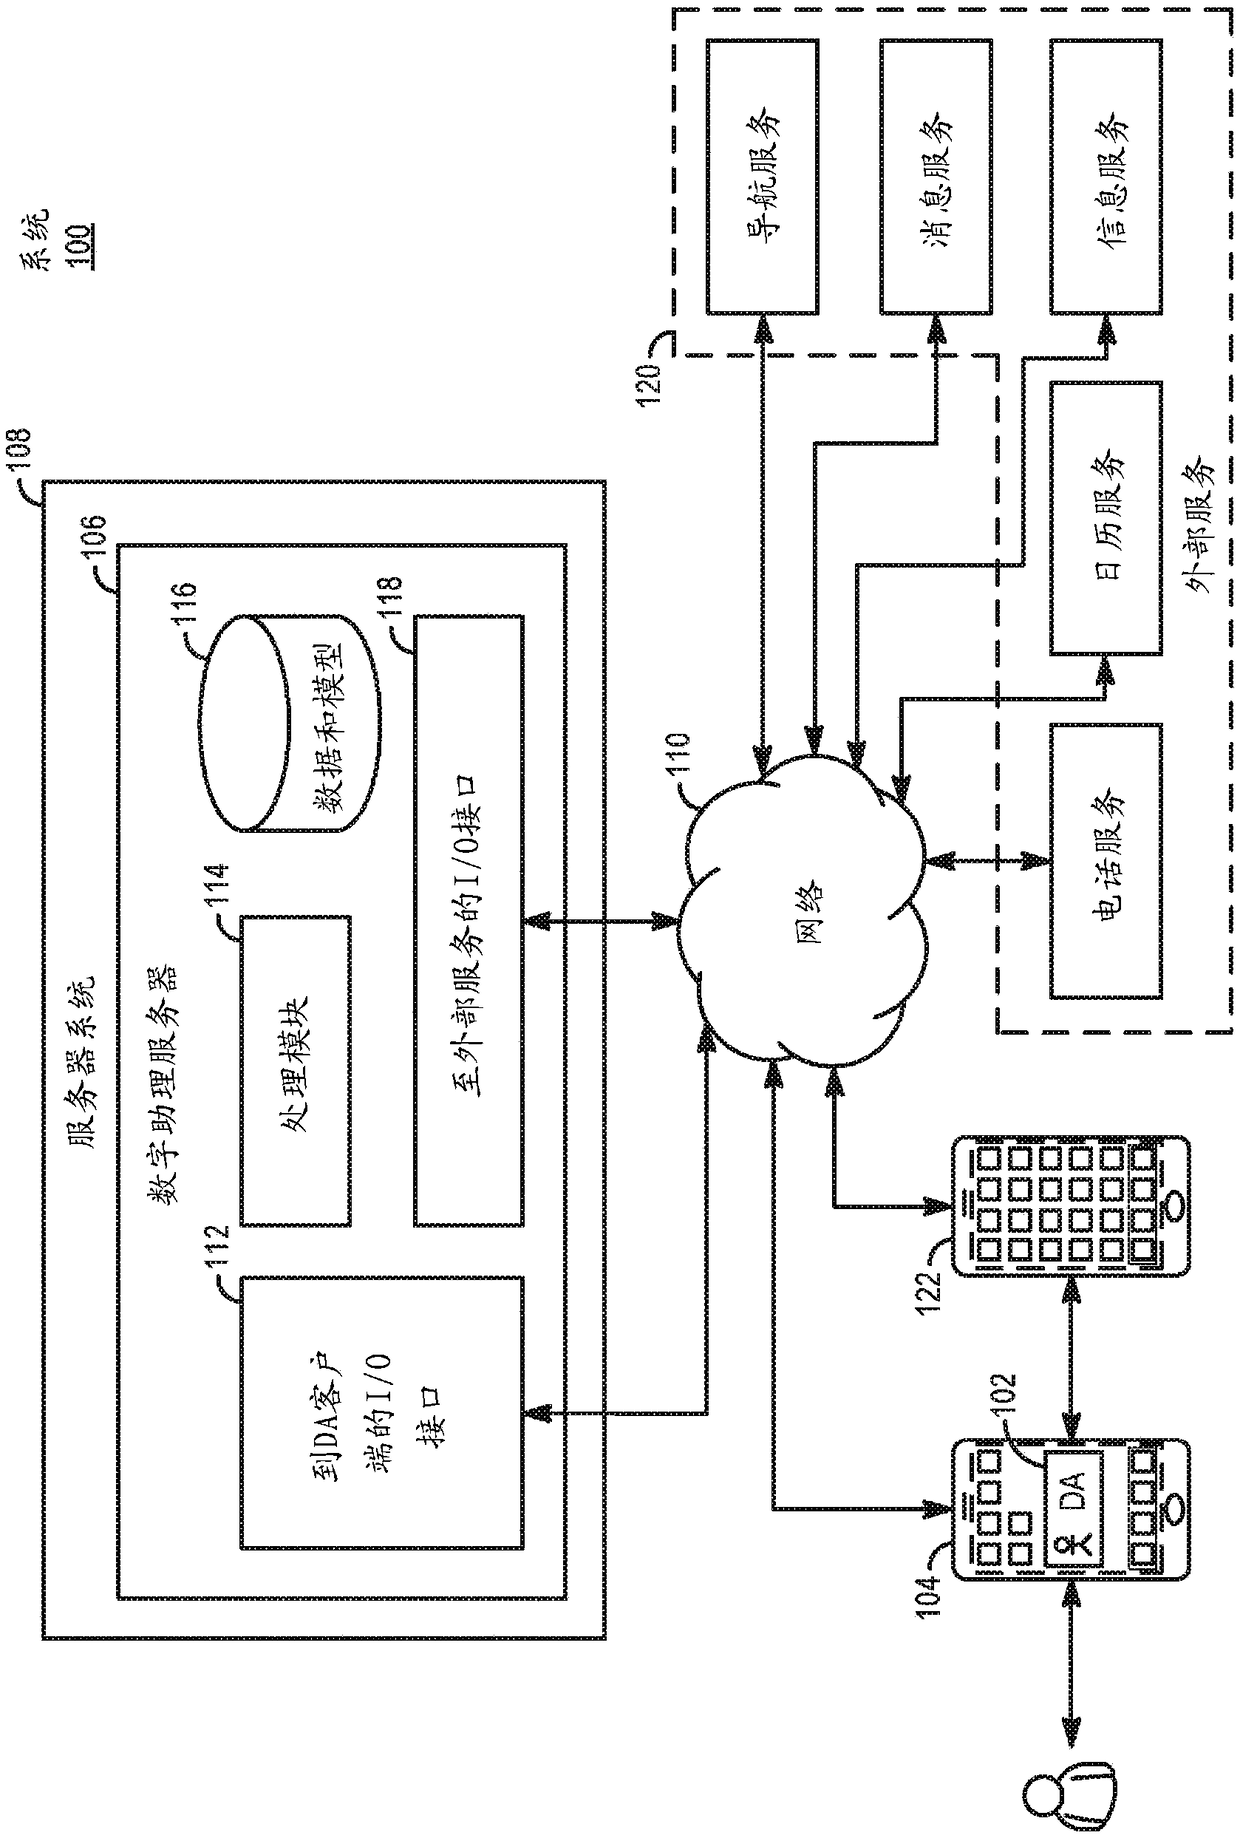 Proactive assistance based on dialog communication between devices